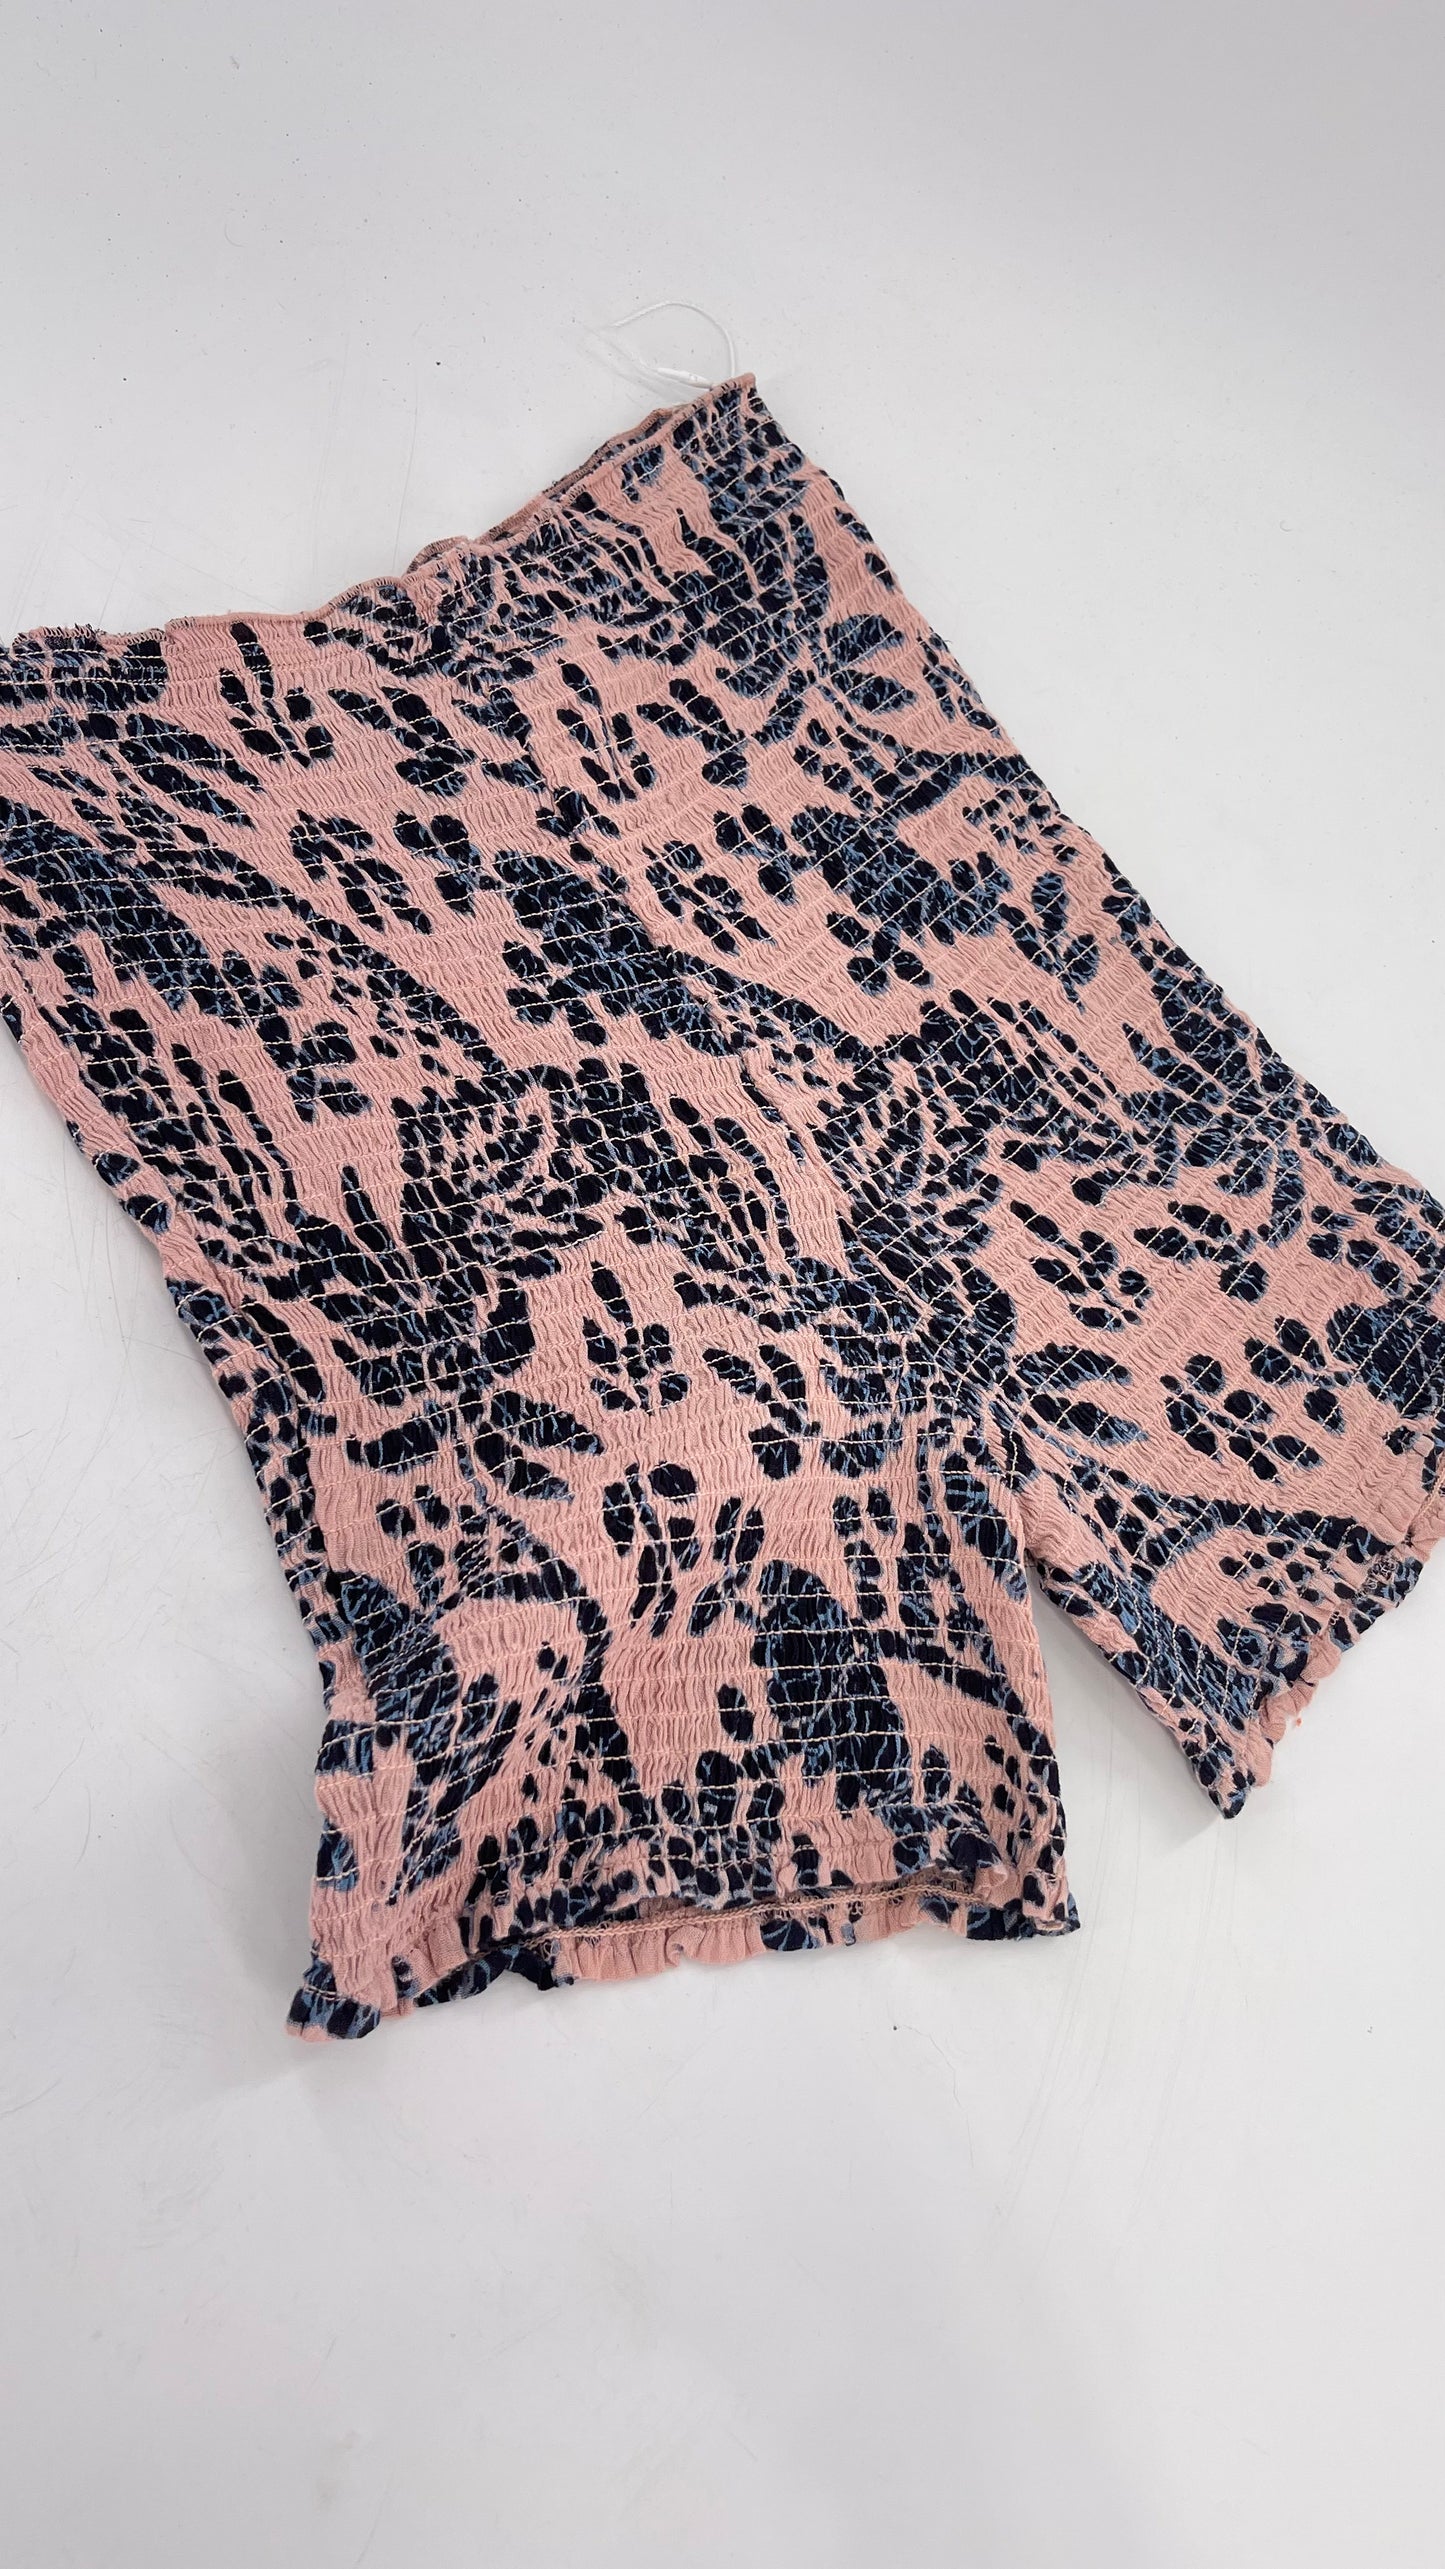 Free People Pink/Navy Patterned Smocked Shorts (XS/S)